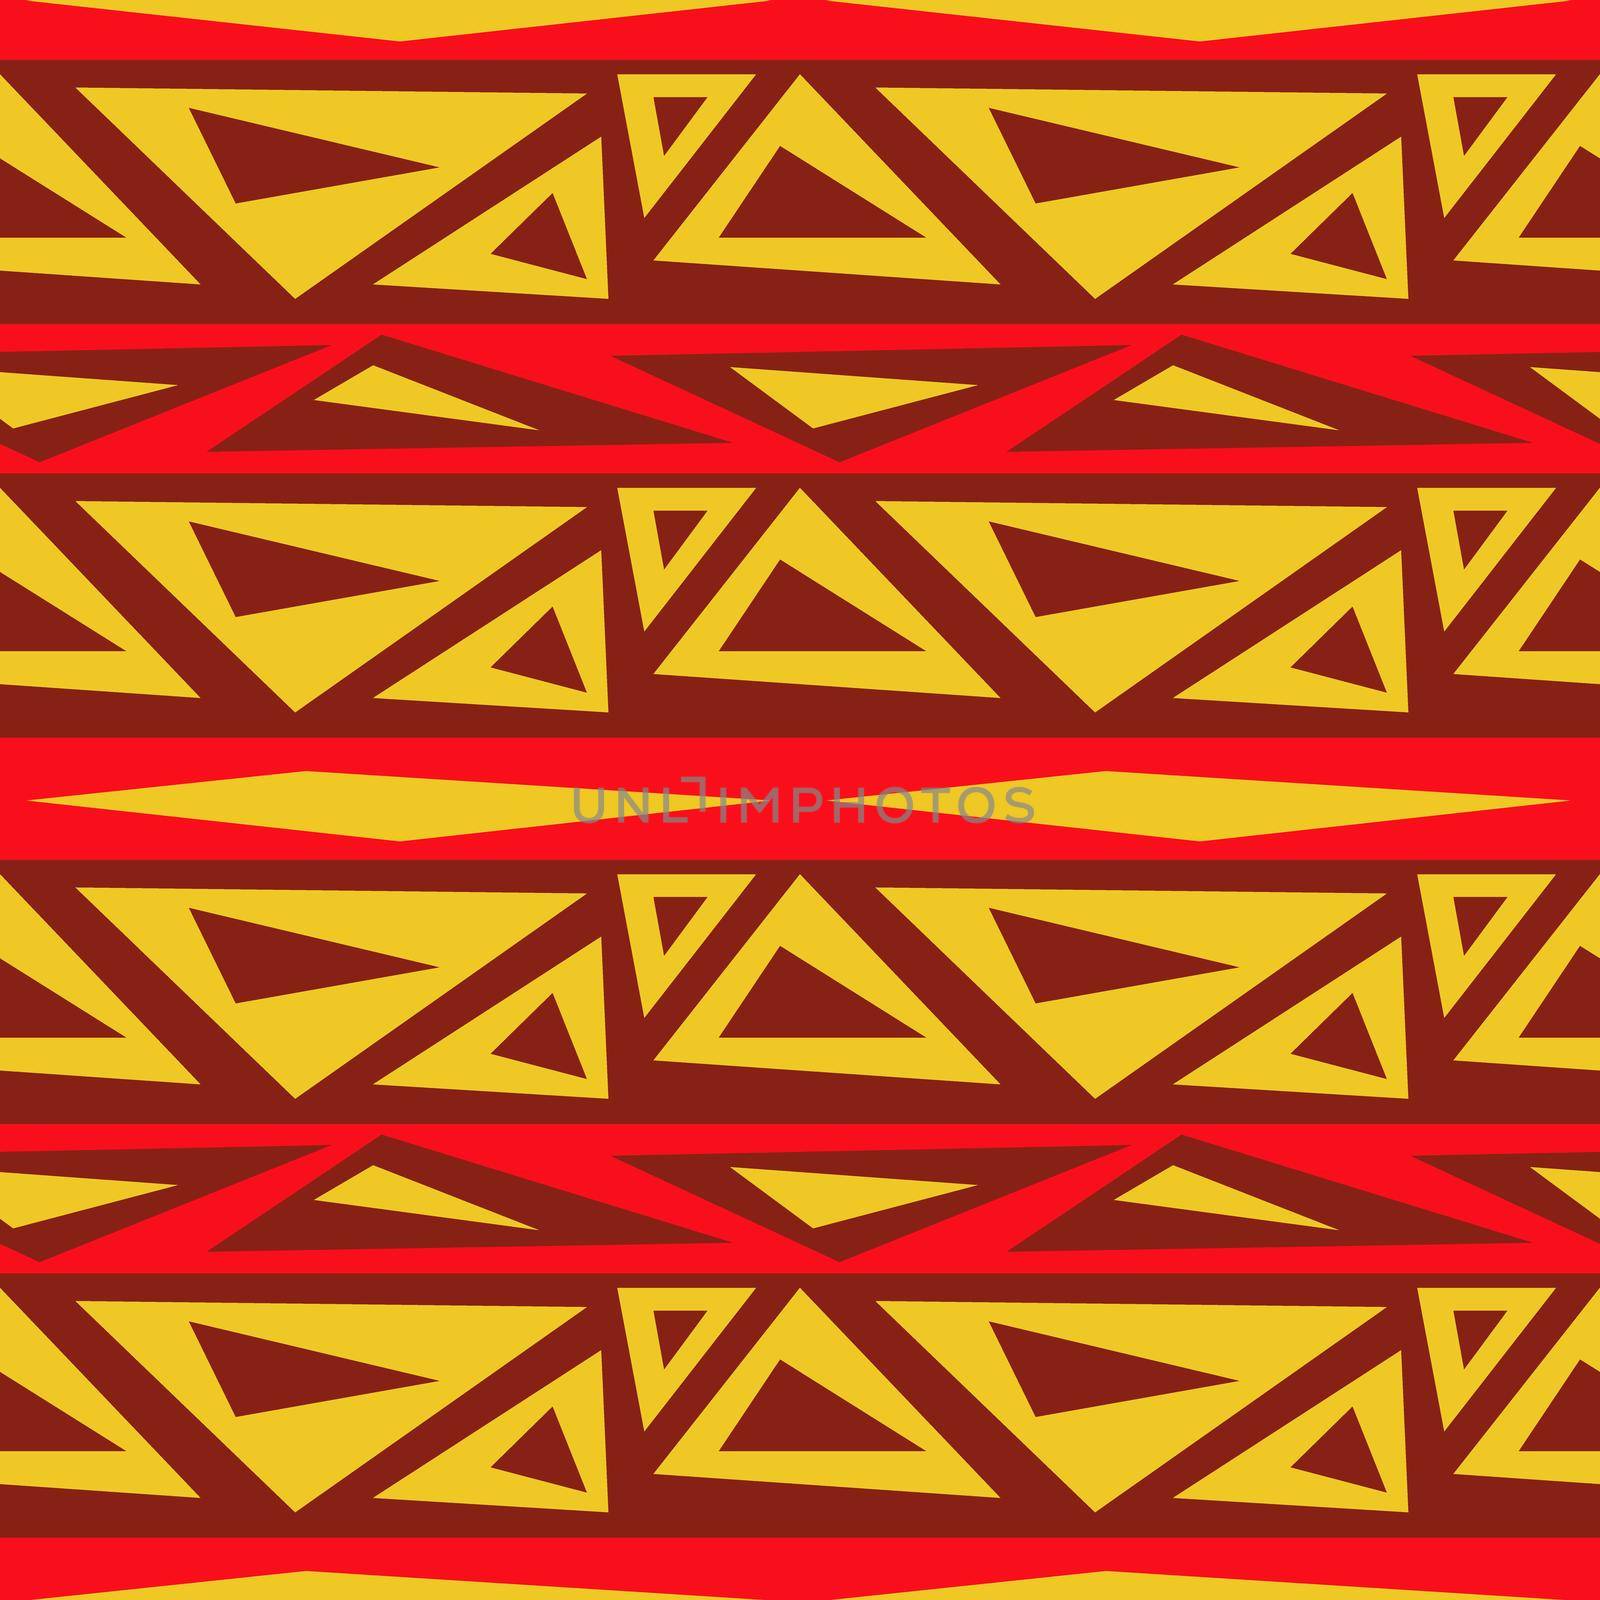 African tribal ornament abstract ethno pattern Bright tribal texture